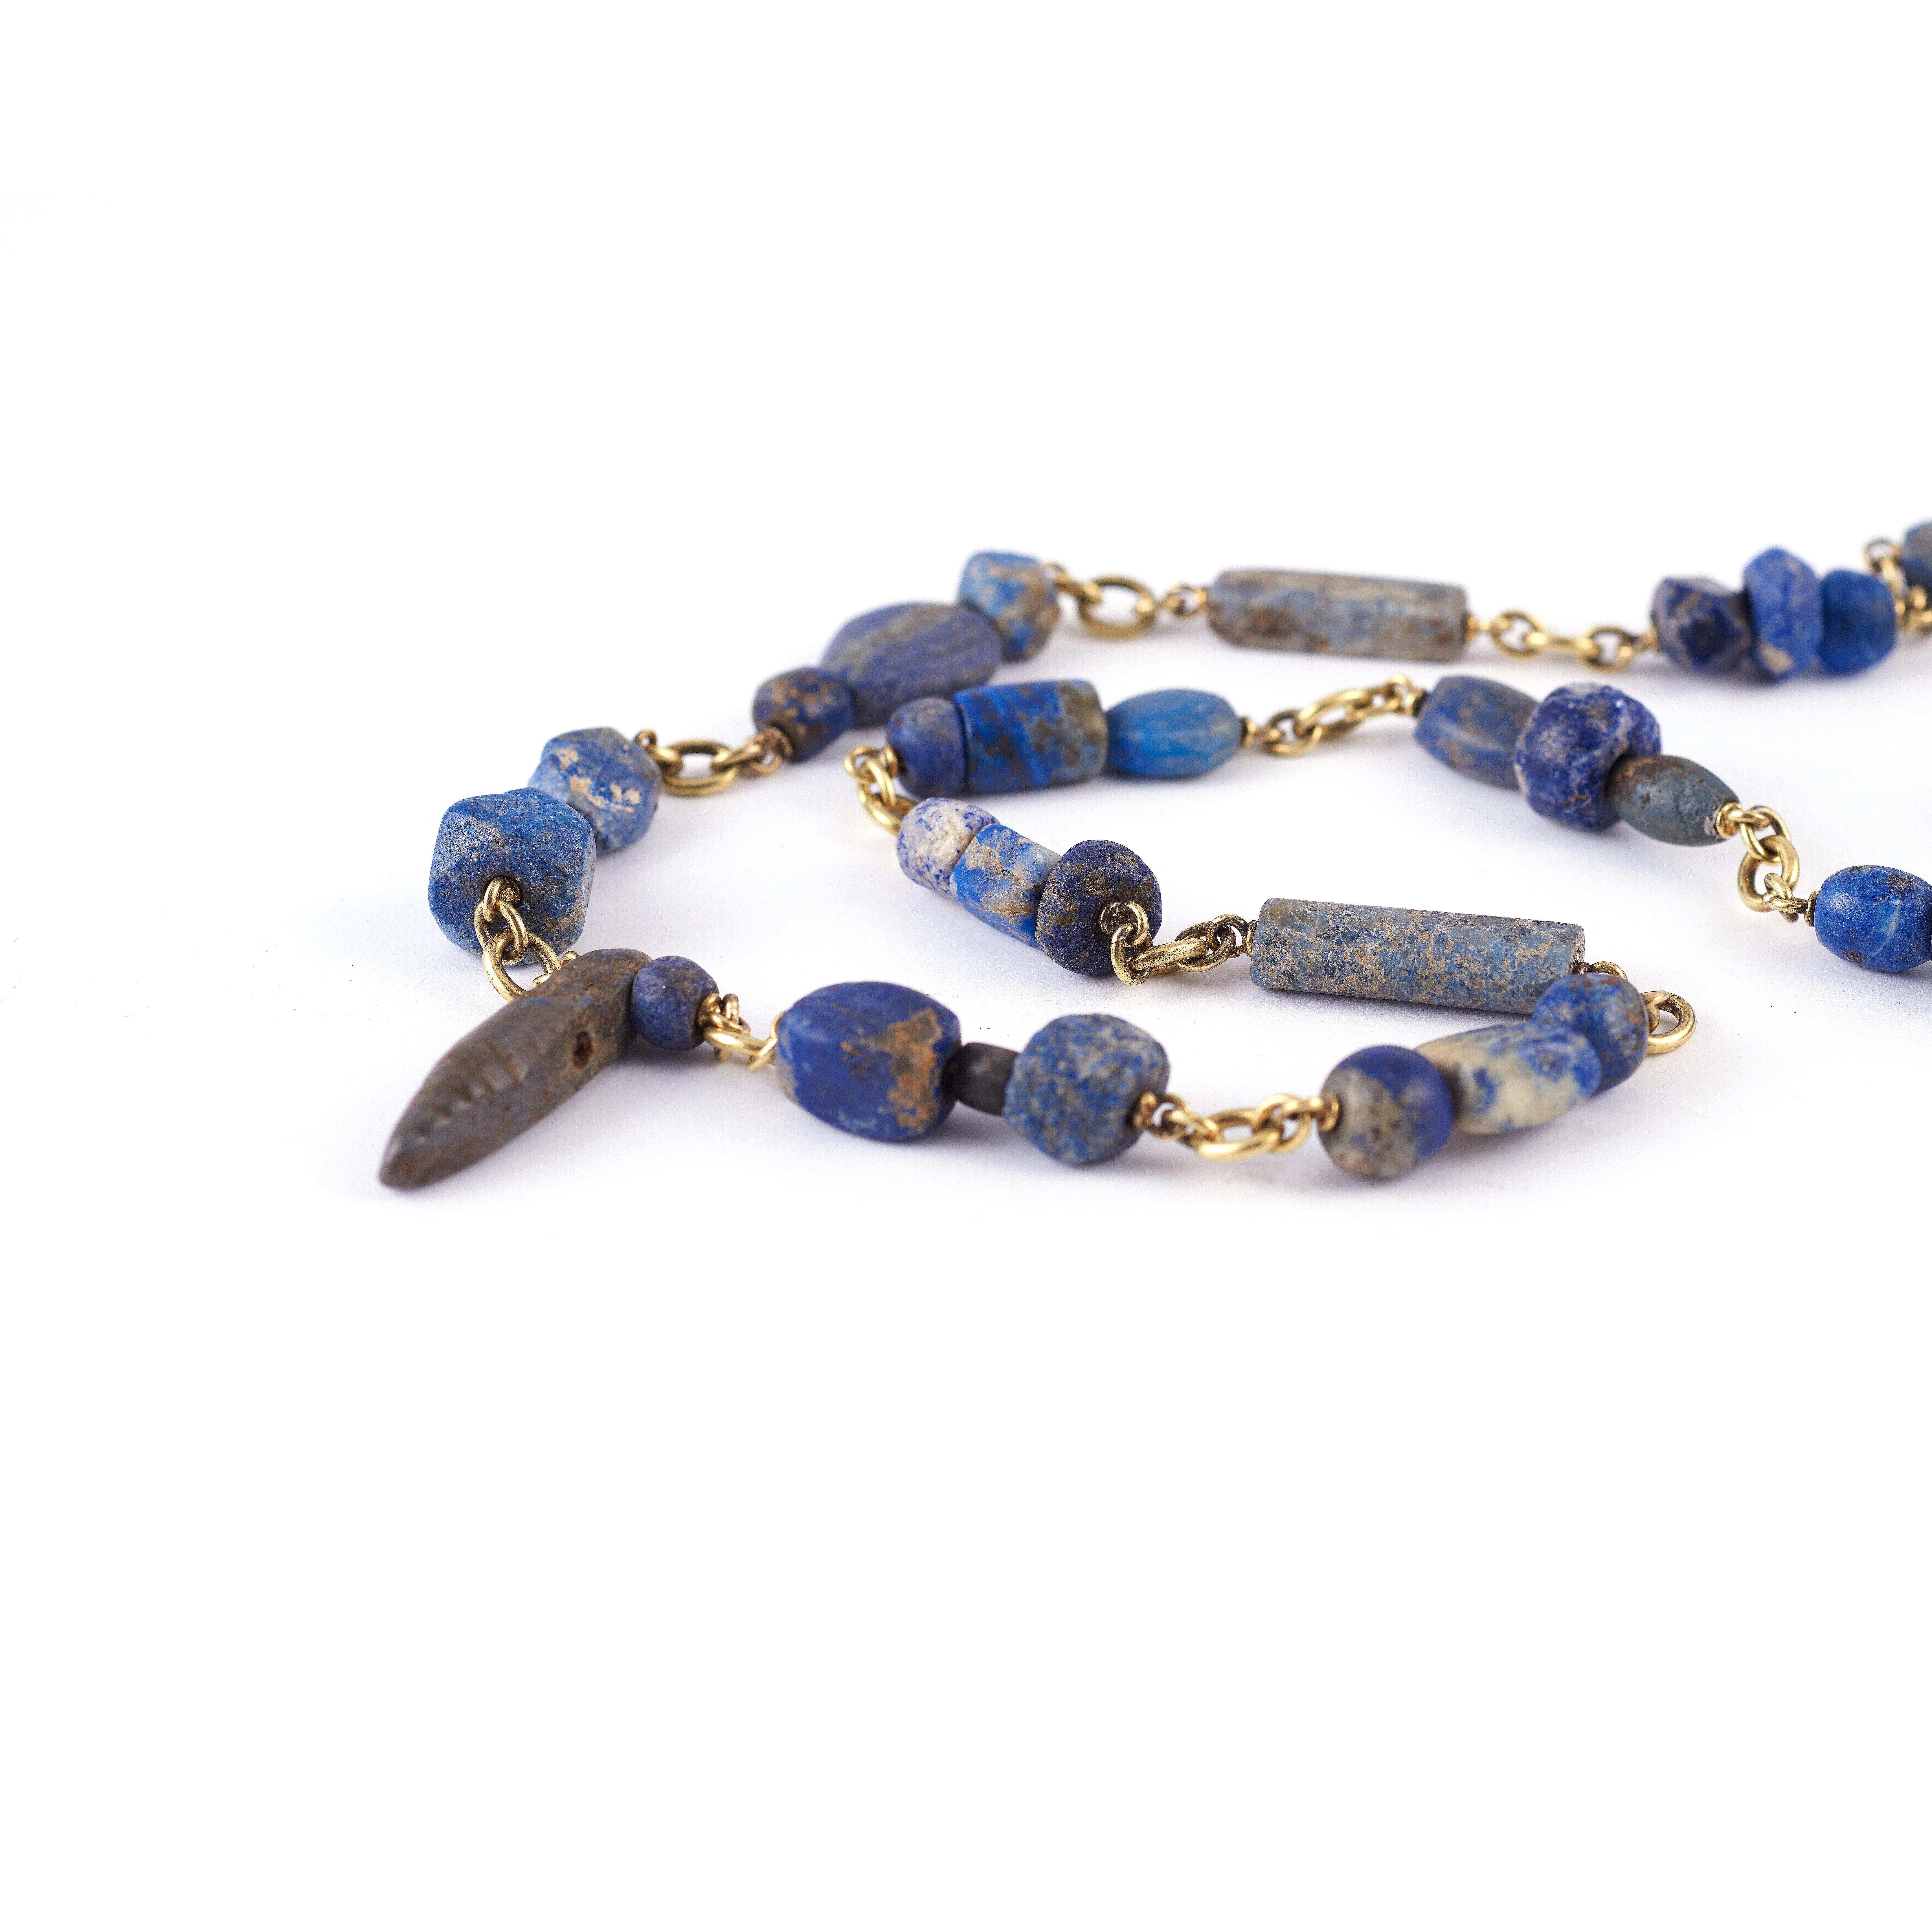 Women's or Men's Ancient Lapis Bead Necklace with Handmade 18k Yellow Gold Chain For Sale